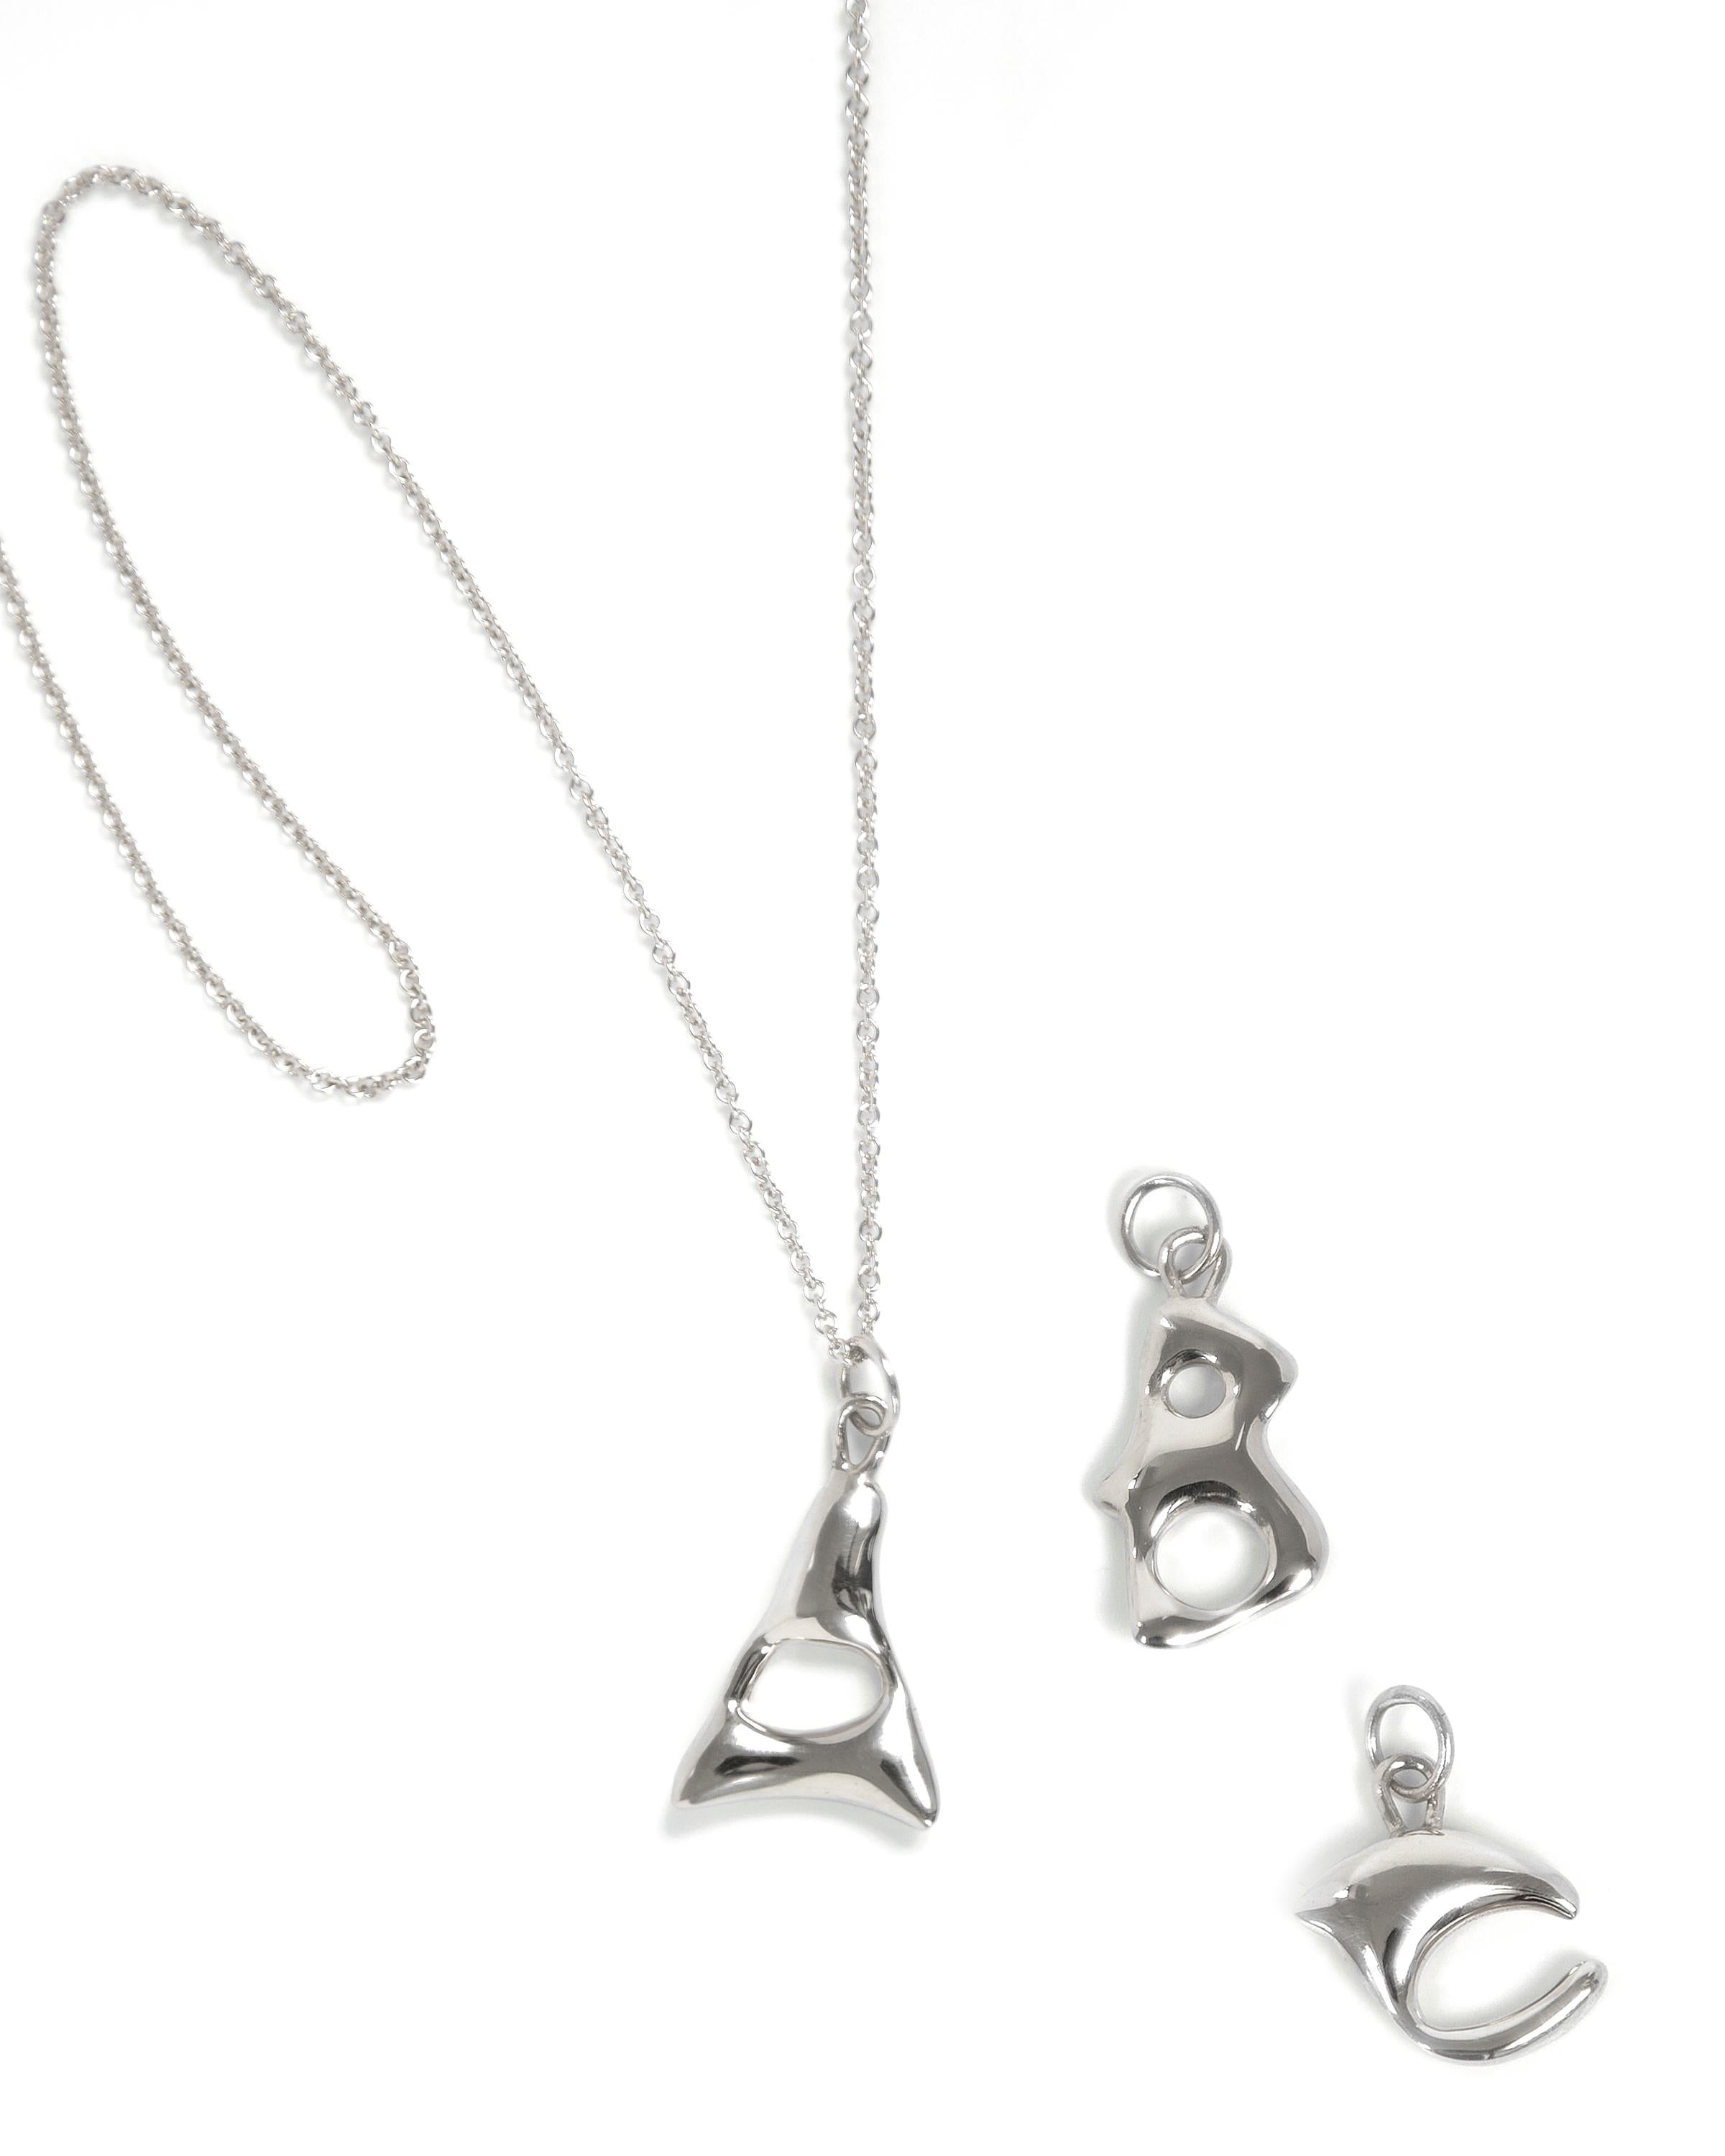 BAR Jewellery, London UK, ALPHABET NECKLACE, Sterling Silver 

Our Alphabet necklaces were designed by hand 'writing' each individual letter using molten wax that is then cast in solid silver. Inspiration for the fluid, tactile letter shapes comes